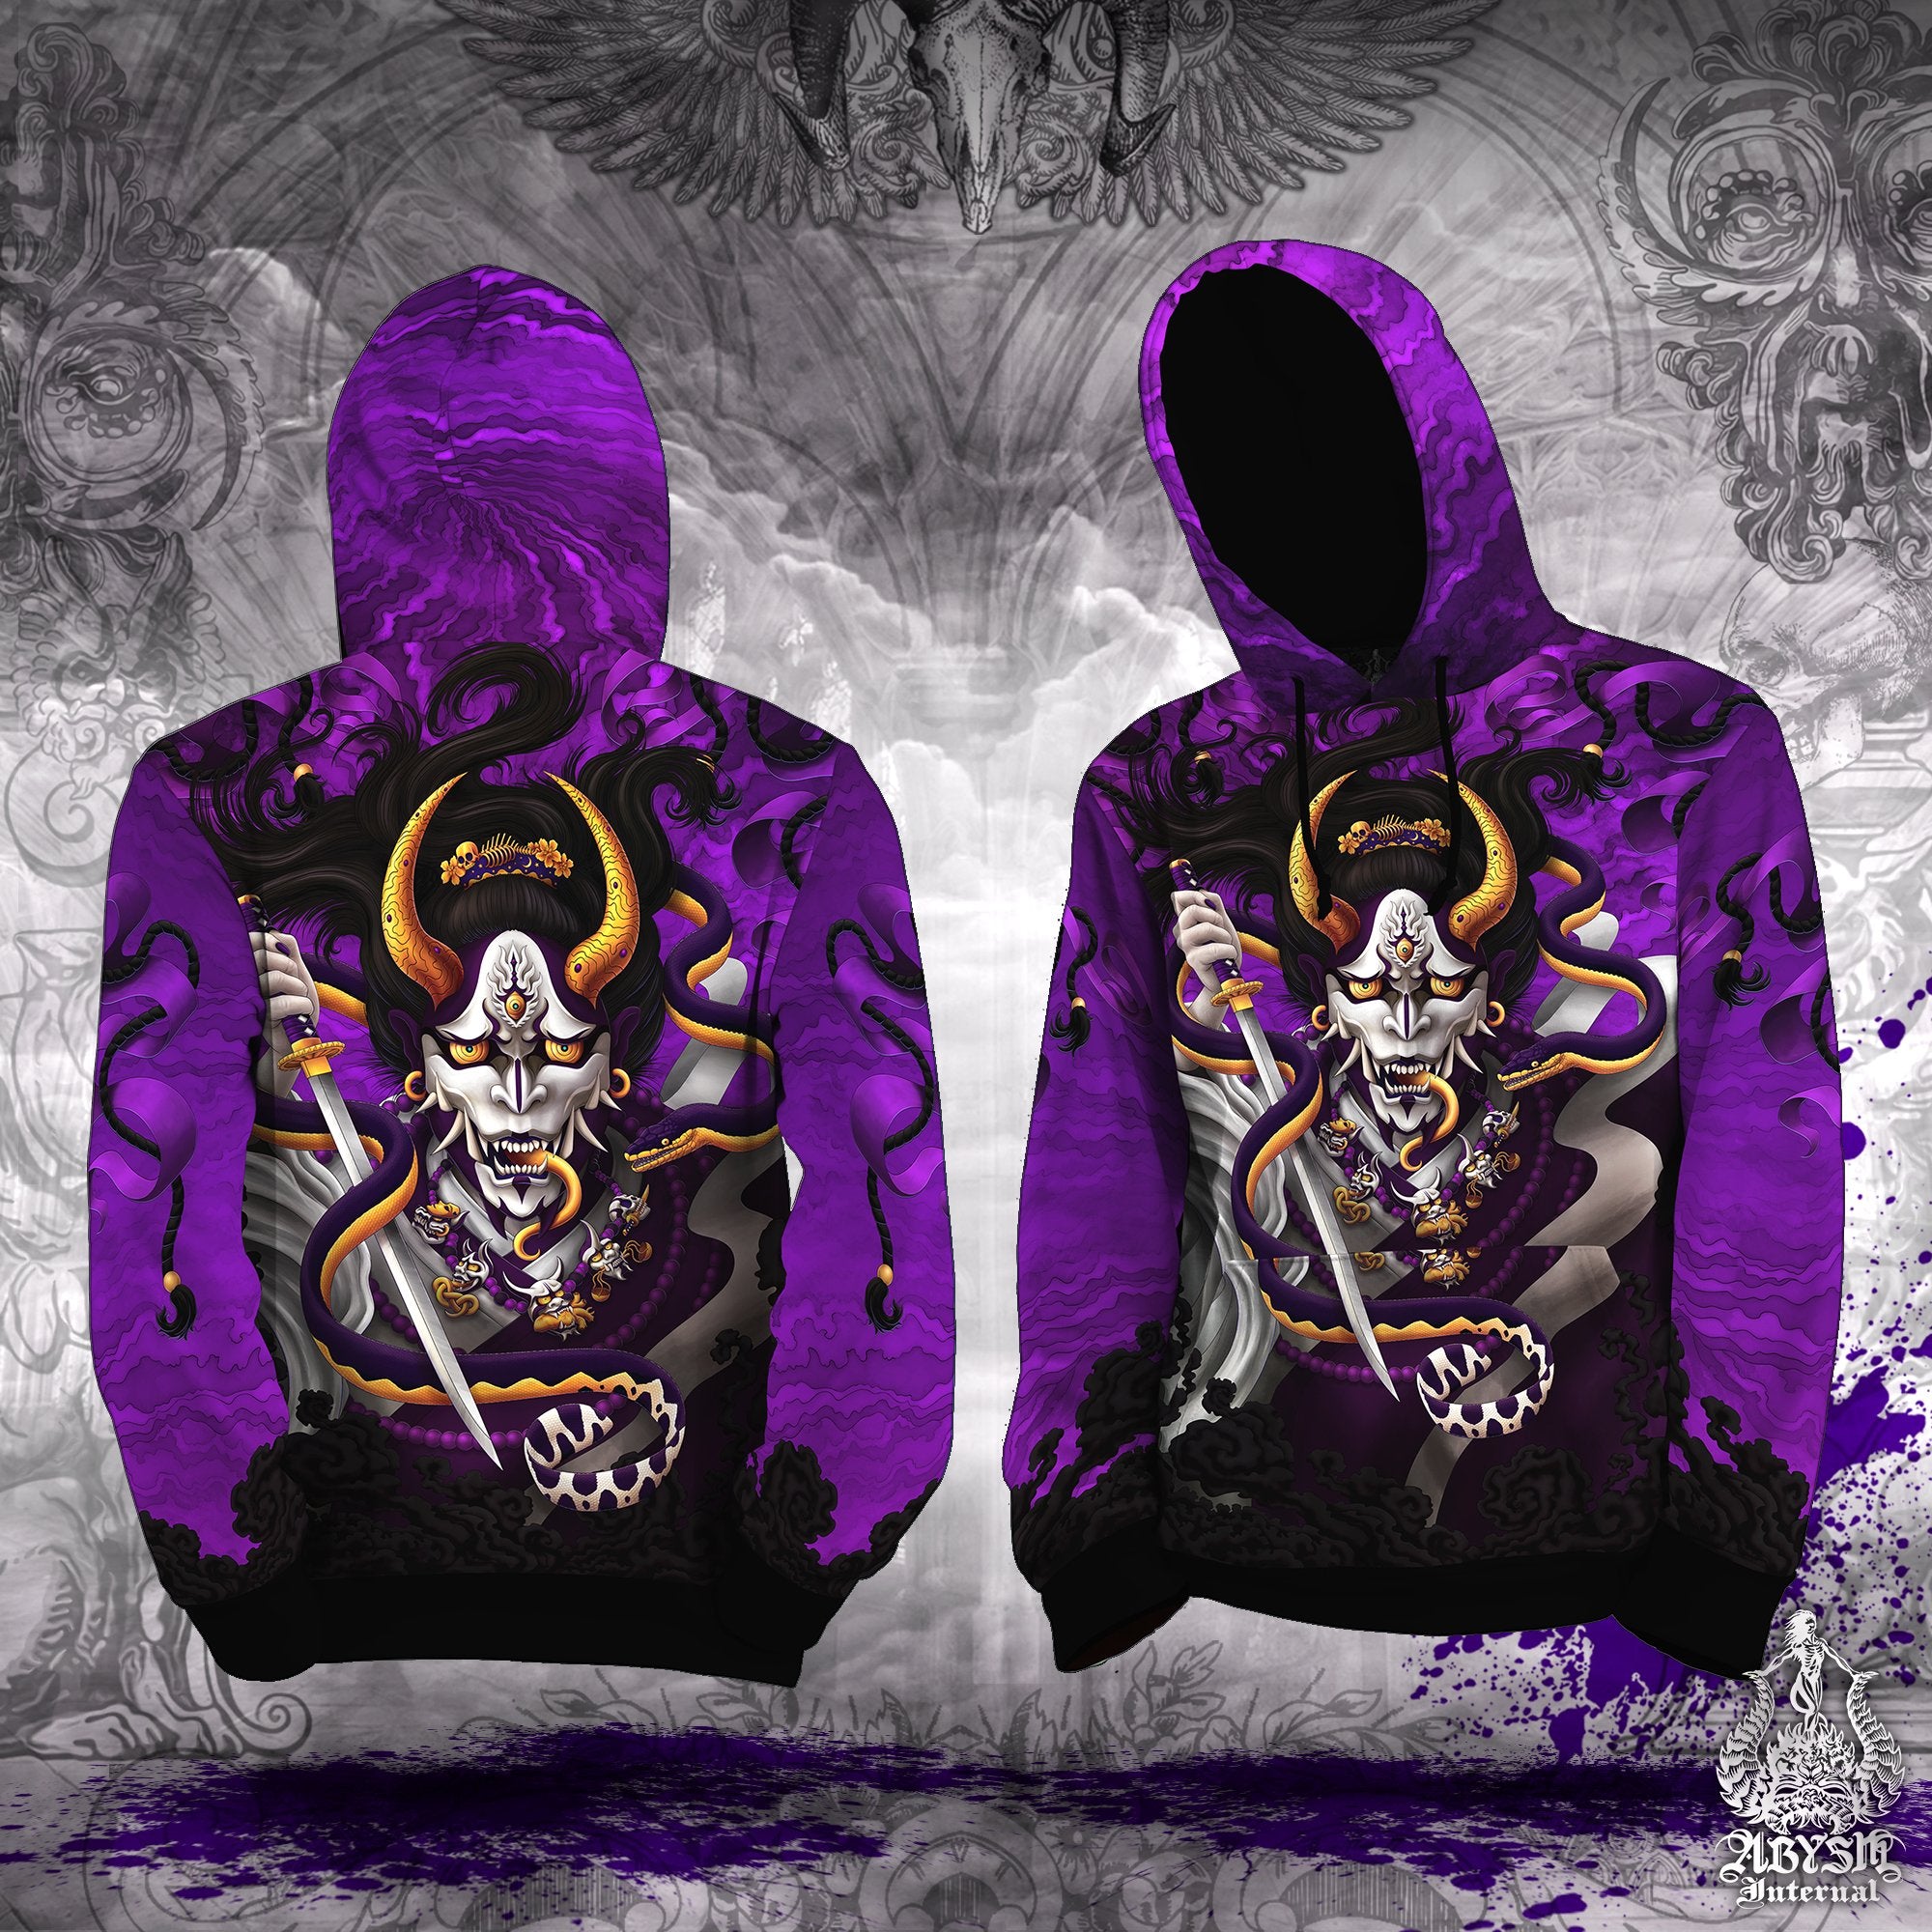 Skater Hoodie, Hannya Sweater, Anime and Manga Streetwear, Fantasy Street Outfit, Japanese Demon Pullover, Alternative Clothing, Unisex - Oni and Snake, White Goth Purple - Abysm Internal